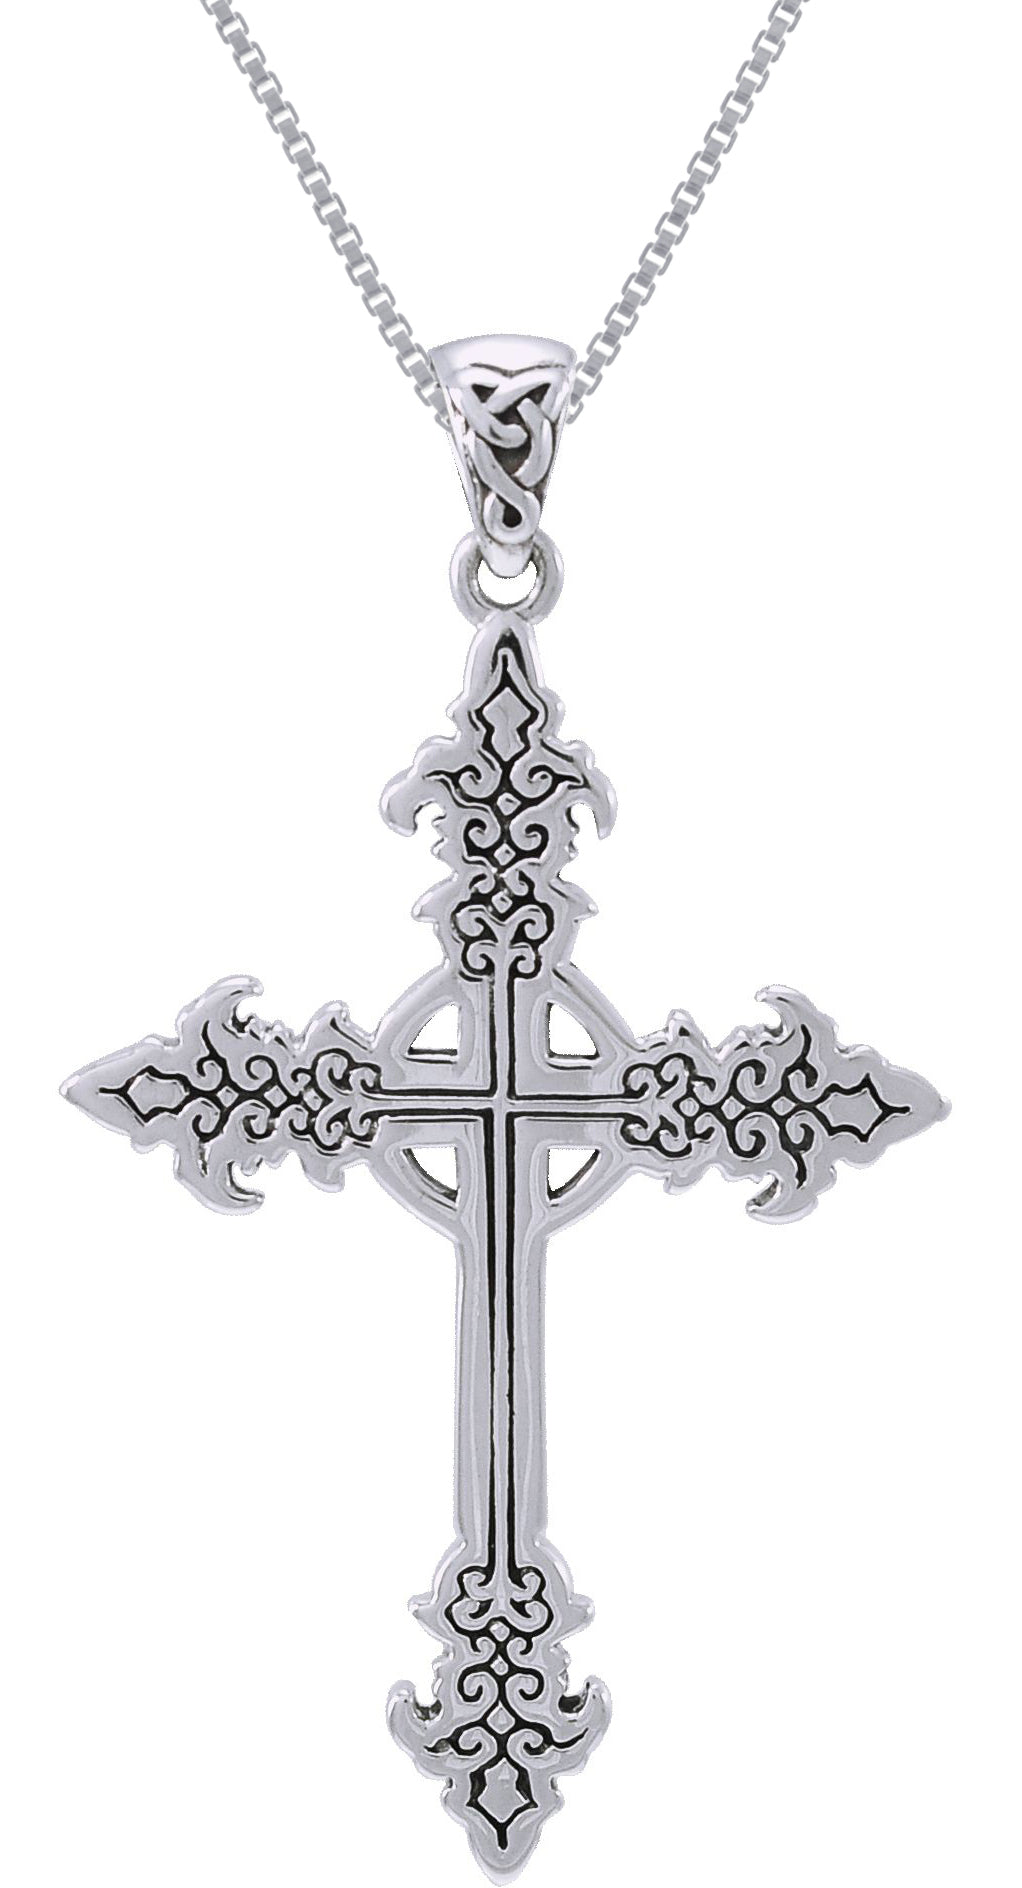 Gothic Cross Necklace - Silver Necklaces For Her